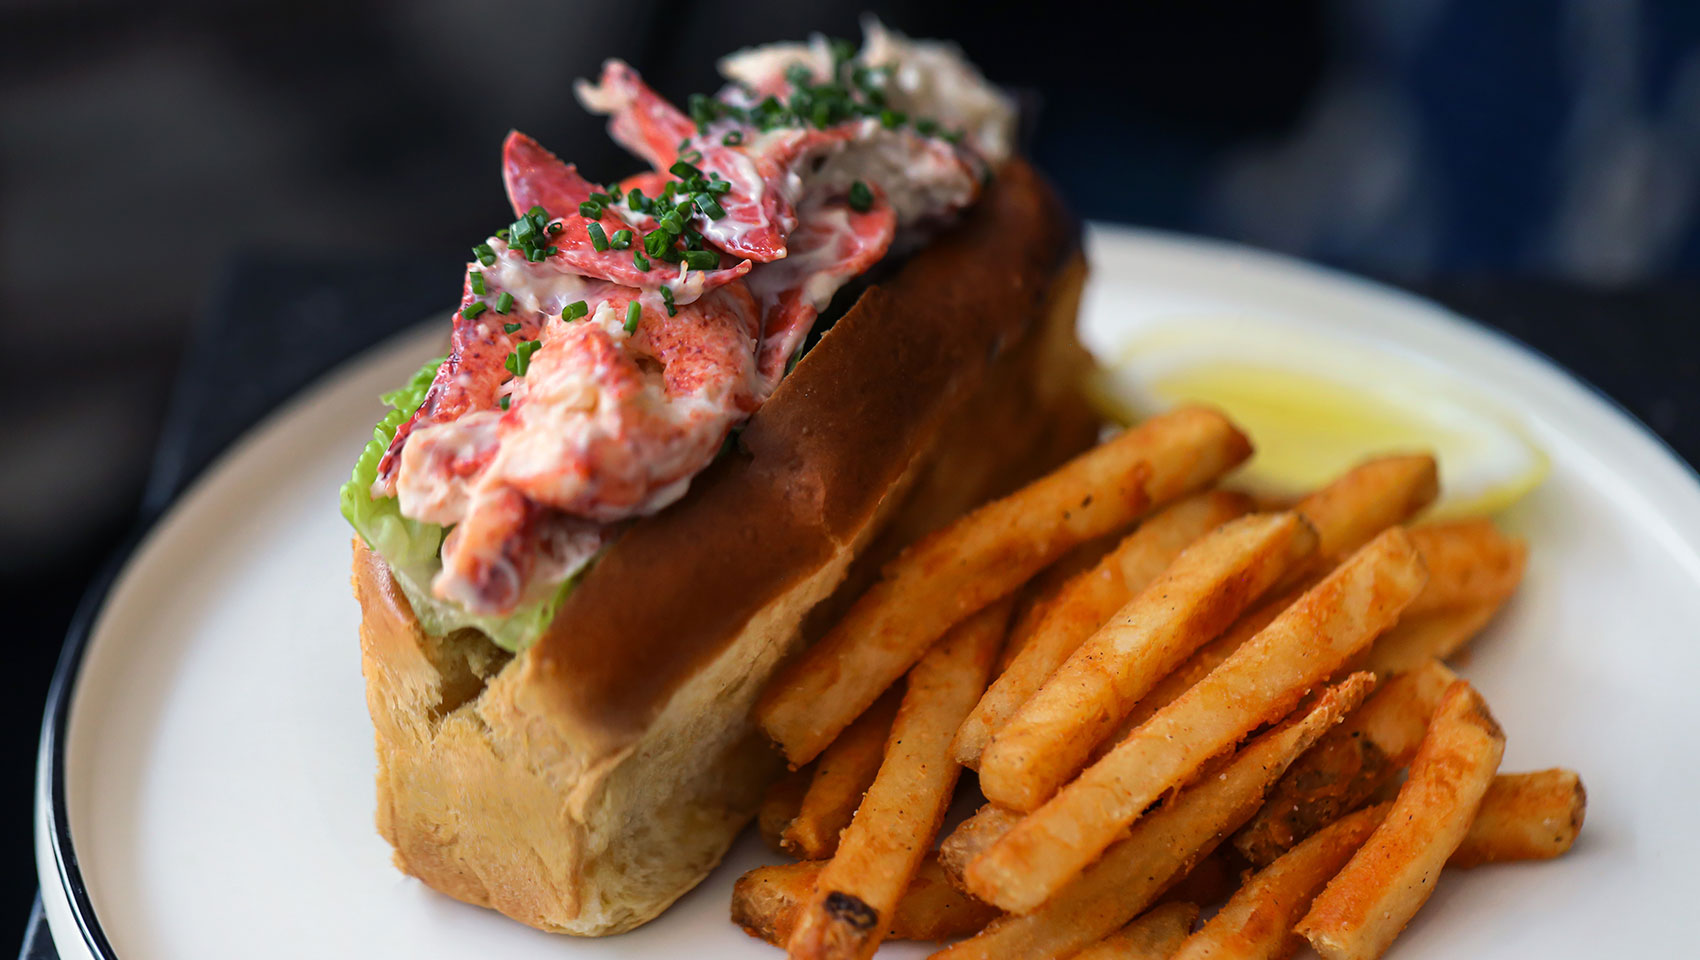 Lobster roll with fries on a plate